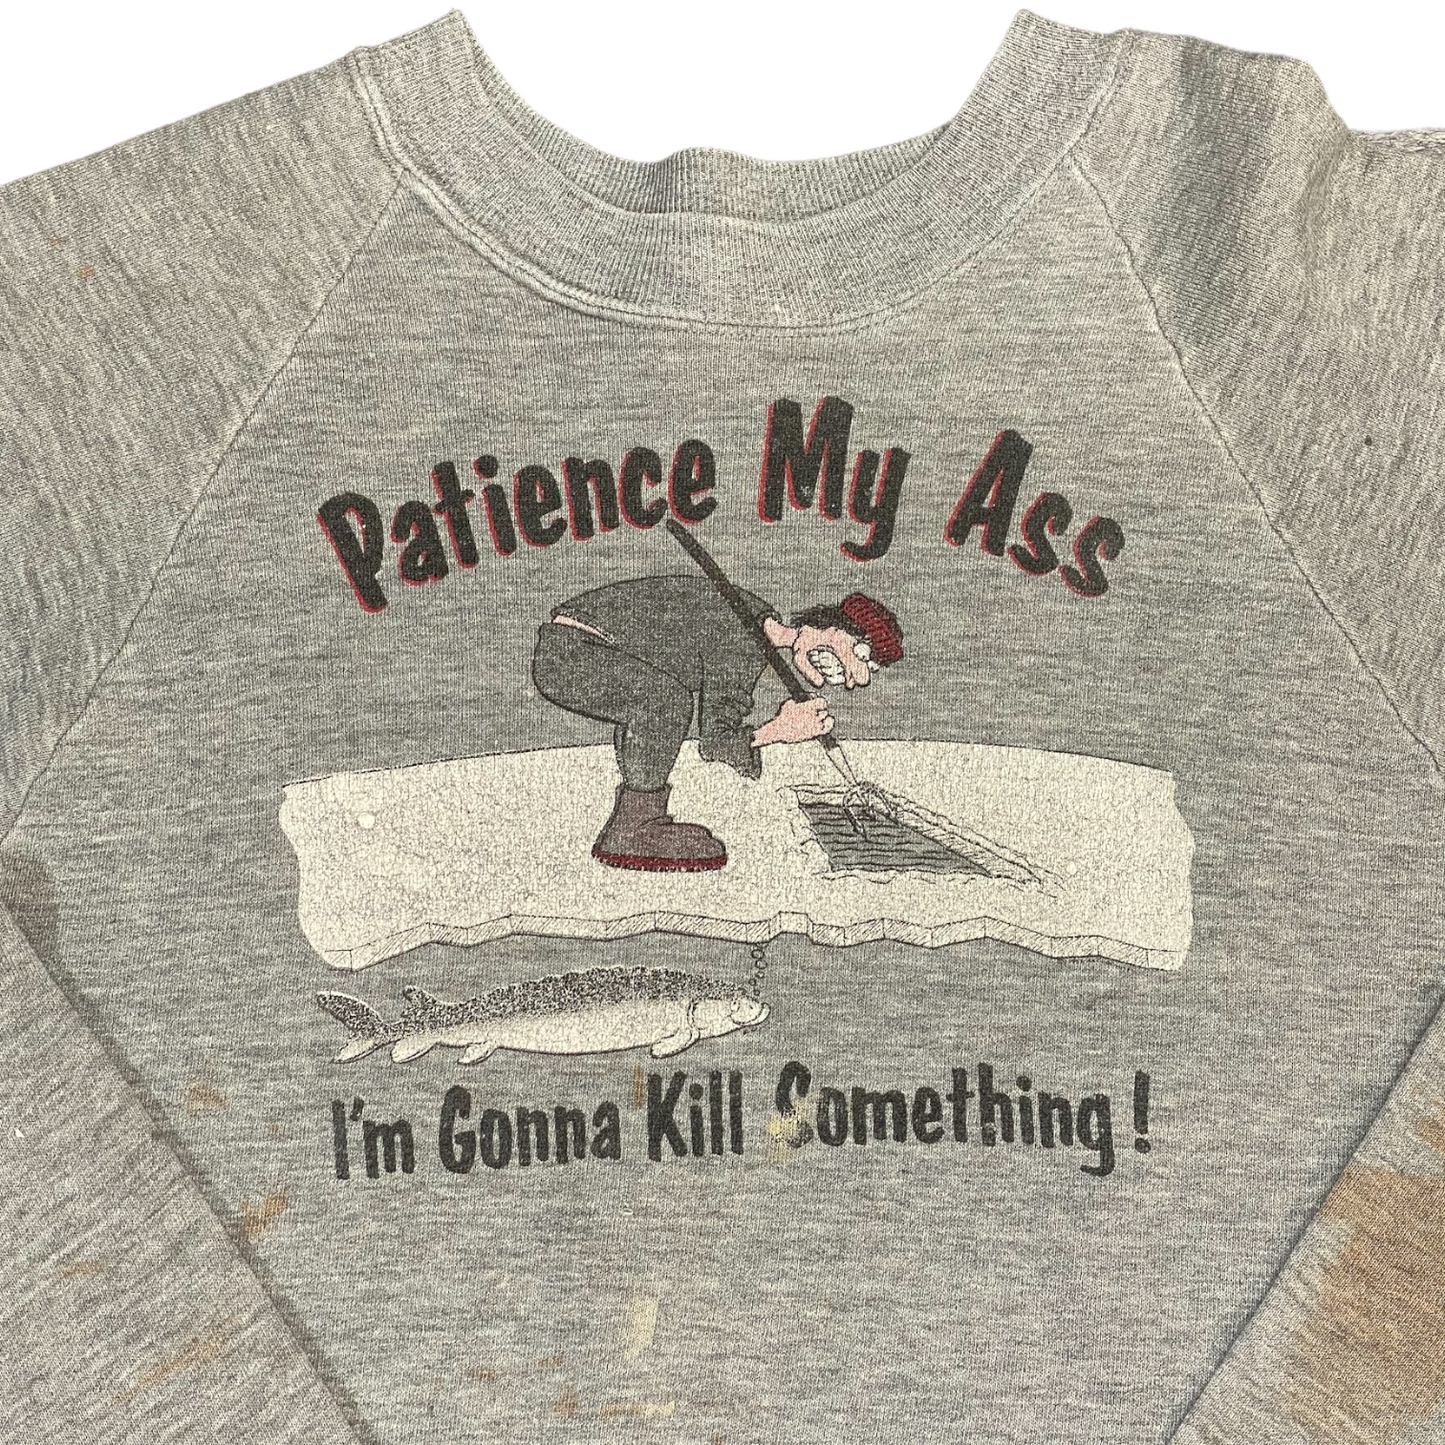 
                  
                    Vintage "Patience My Ass" Fishing Crewneck
                  
                